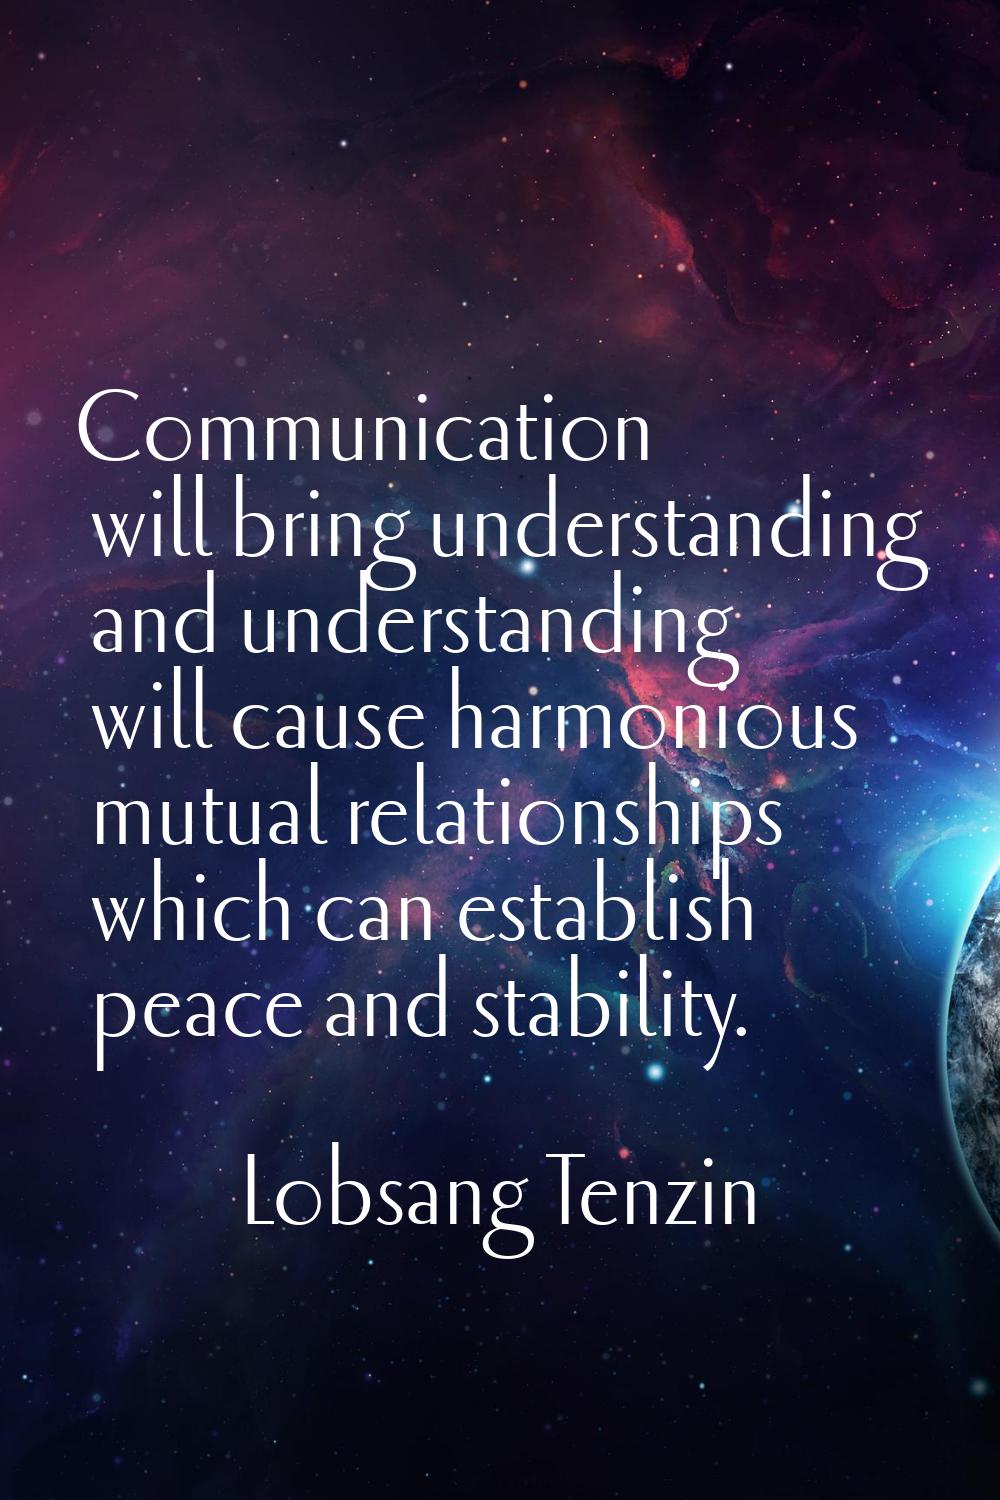 Communication will bring understanding and understanding will cause harmonious mutual relationships